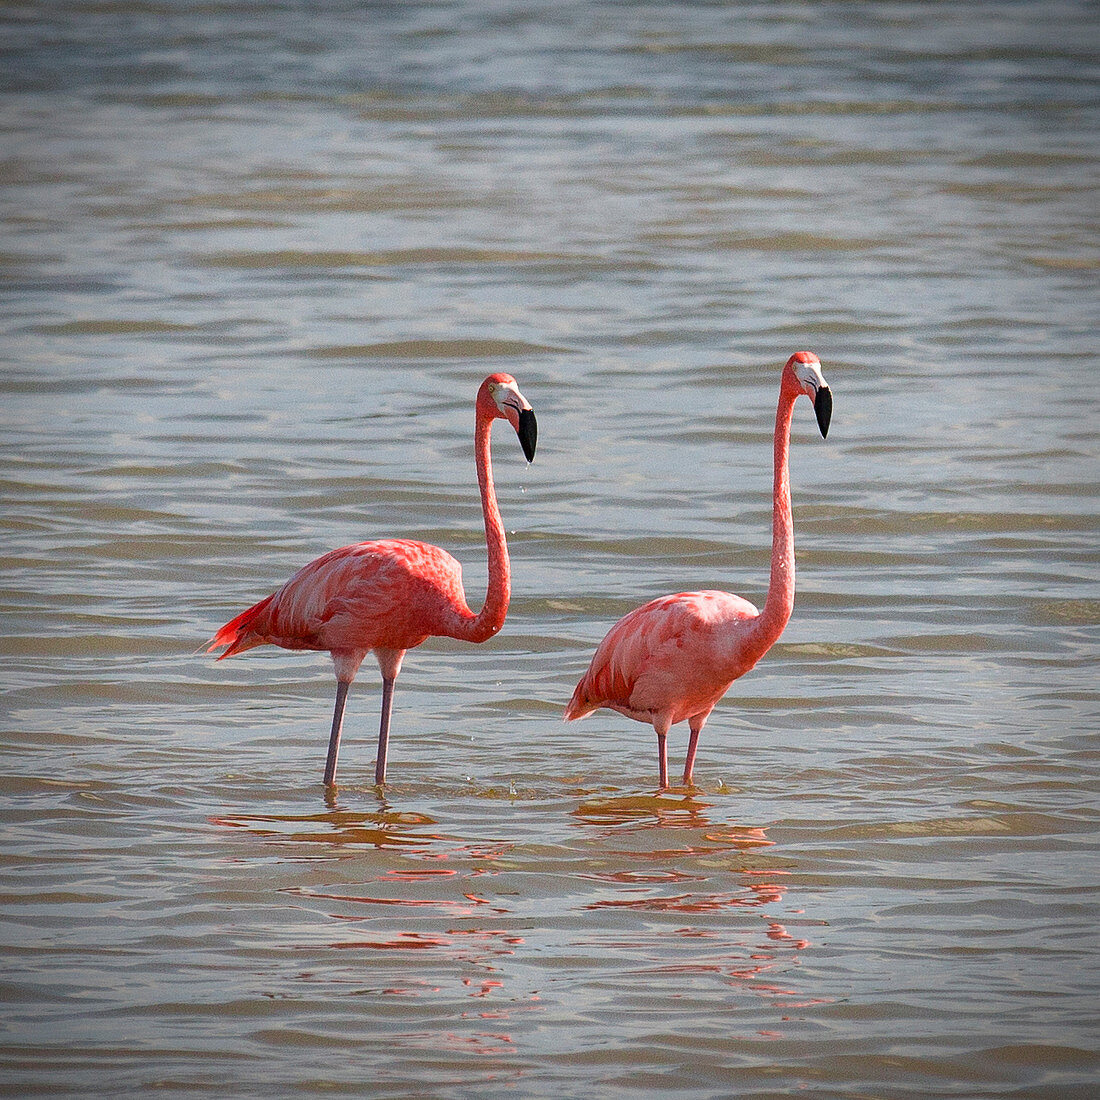 Two flamingos in the water on Cayo Guillermo, Cuba